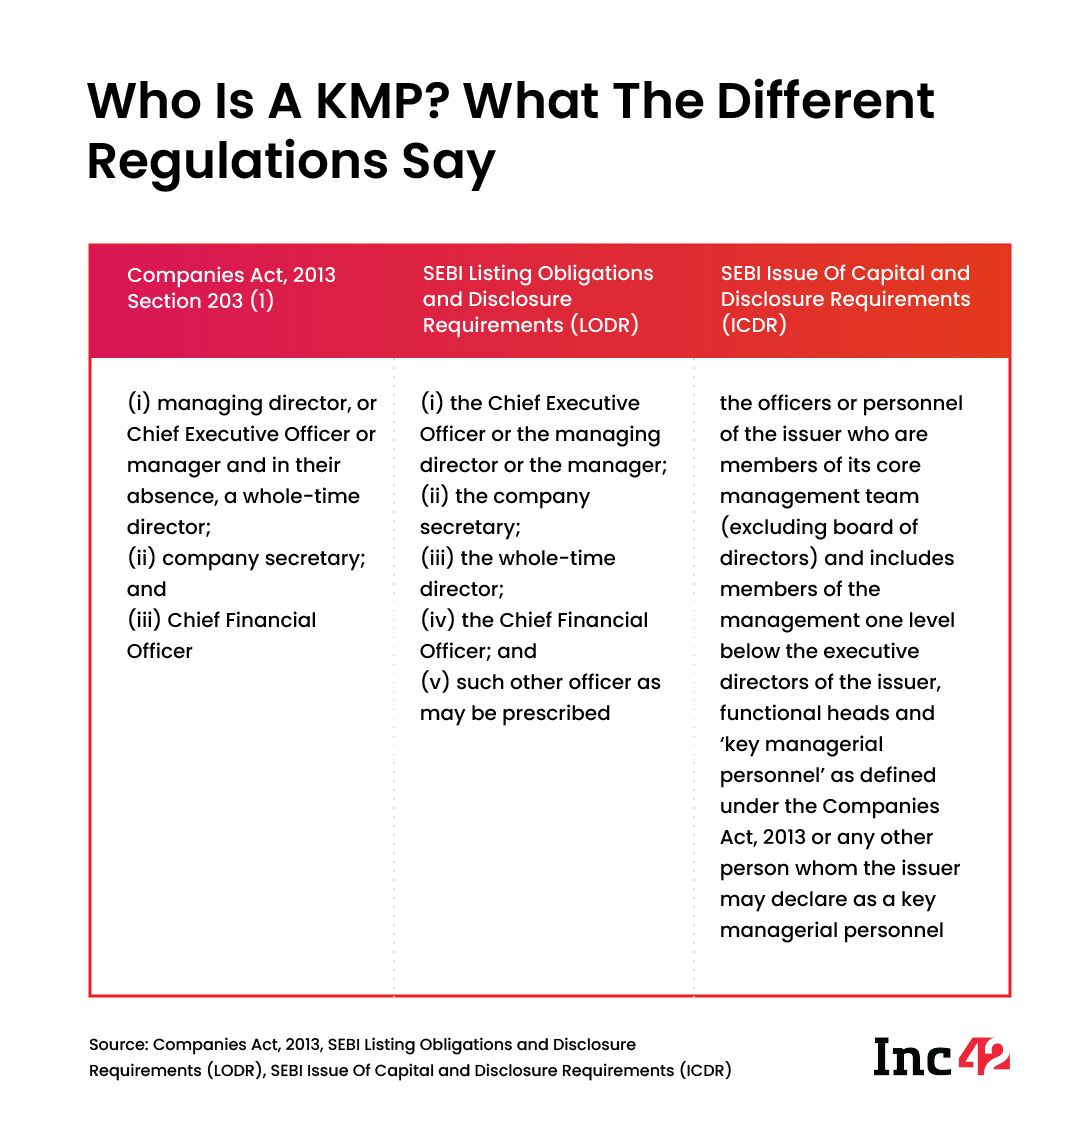 Who is a KMP?